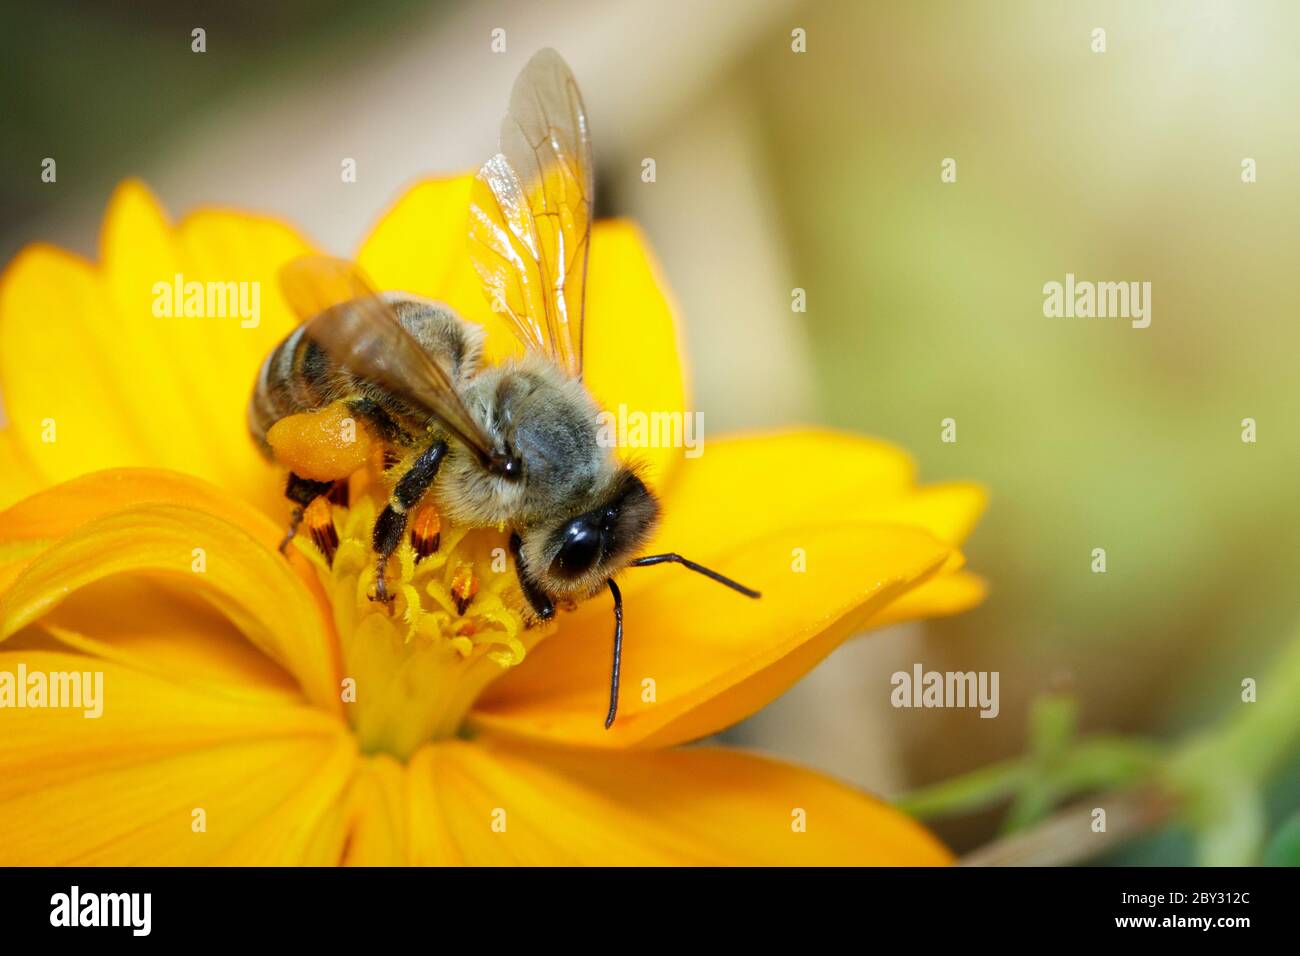 Image of bee or honeybee on yellow flower collects nectar. Golden honeybee on flower pollen. Insect. Animal Stock Photo